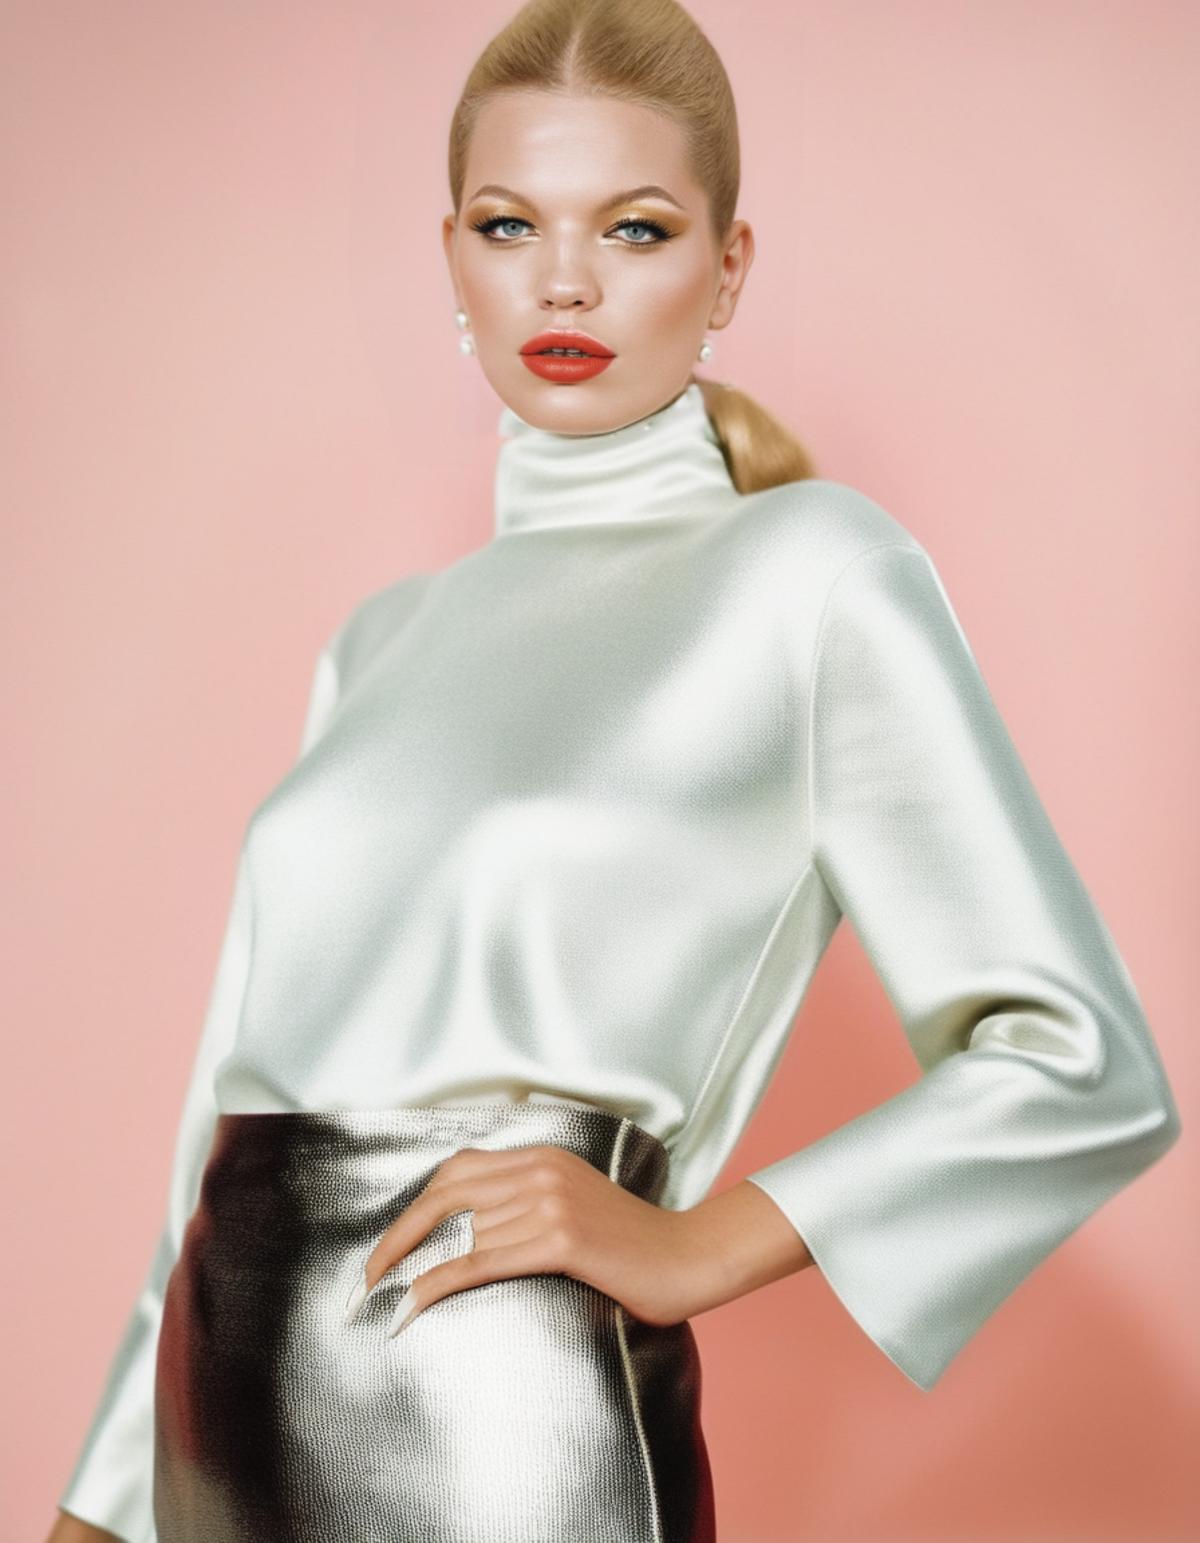 Daphne Groeneveld image by Bytor1966